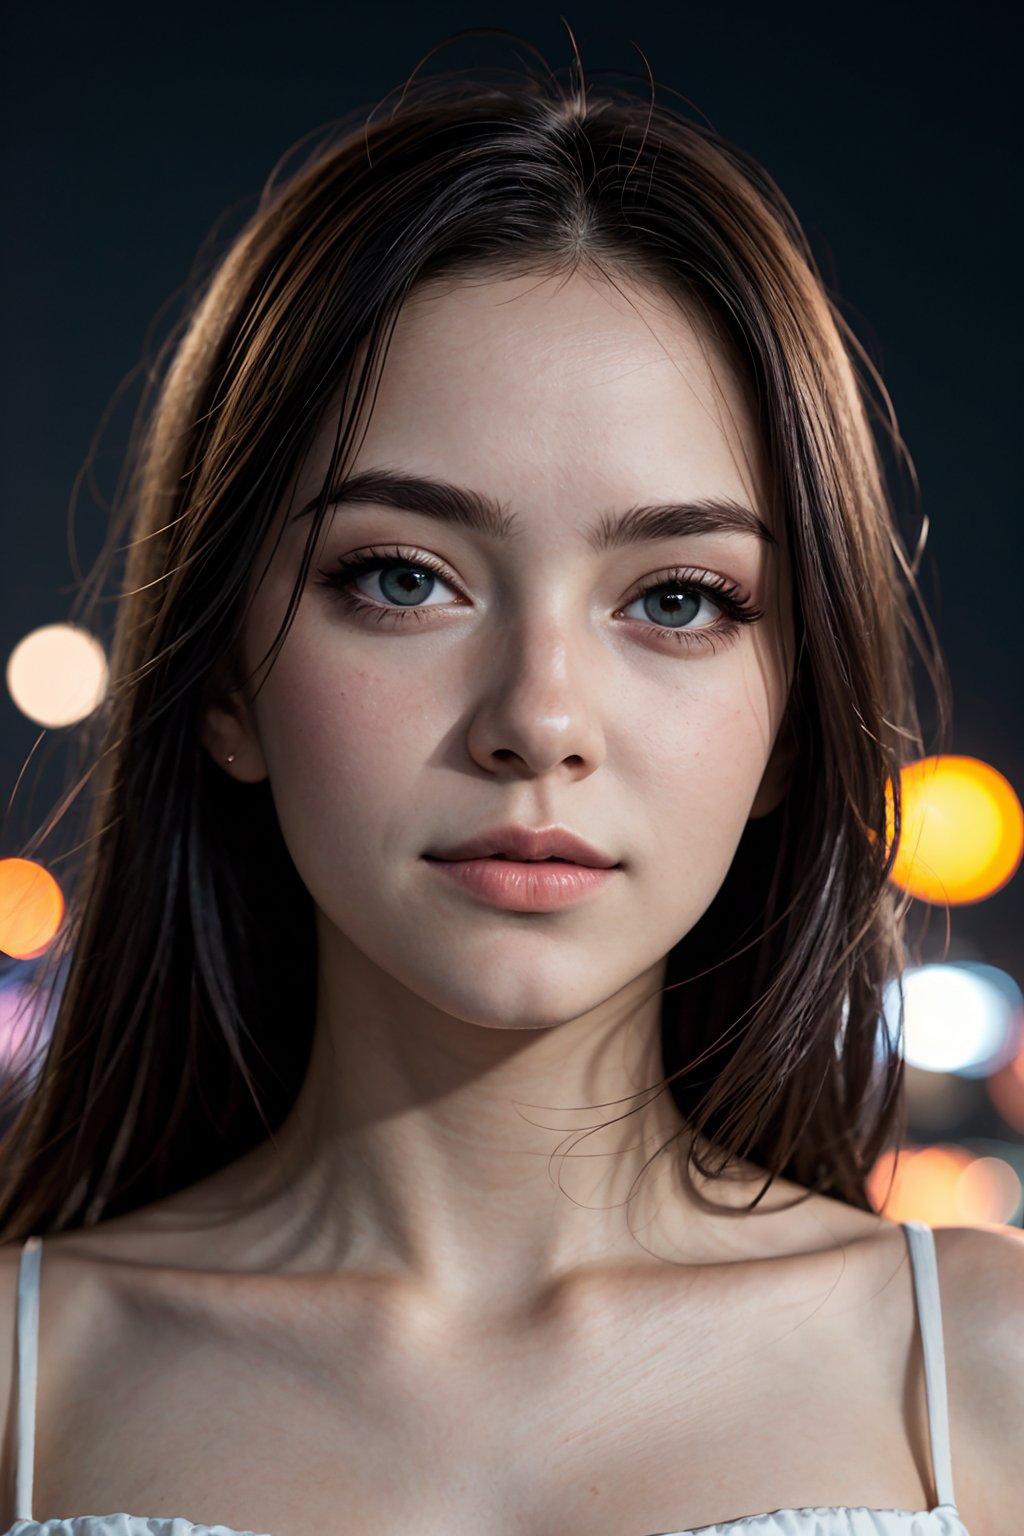 instagram photo, closeup face photo of 18 y.o swedish woman in dress, beautiful face, makeup, night city street, bokeh, motion blur
, Extremely Realistic